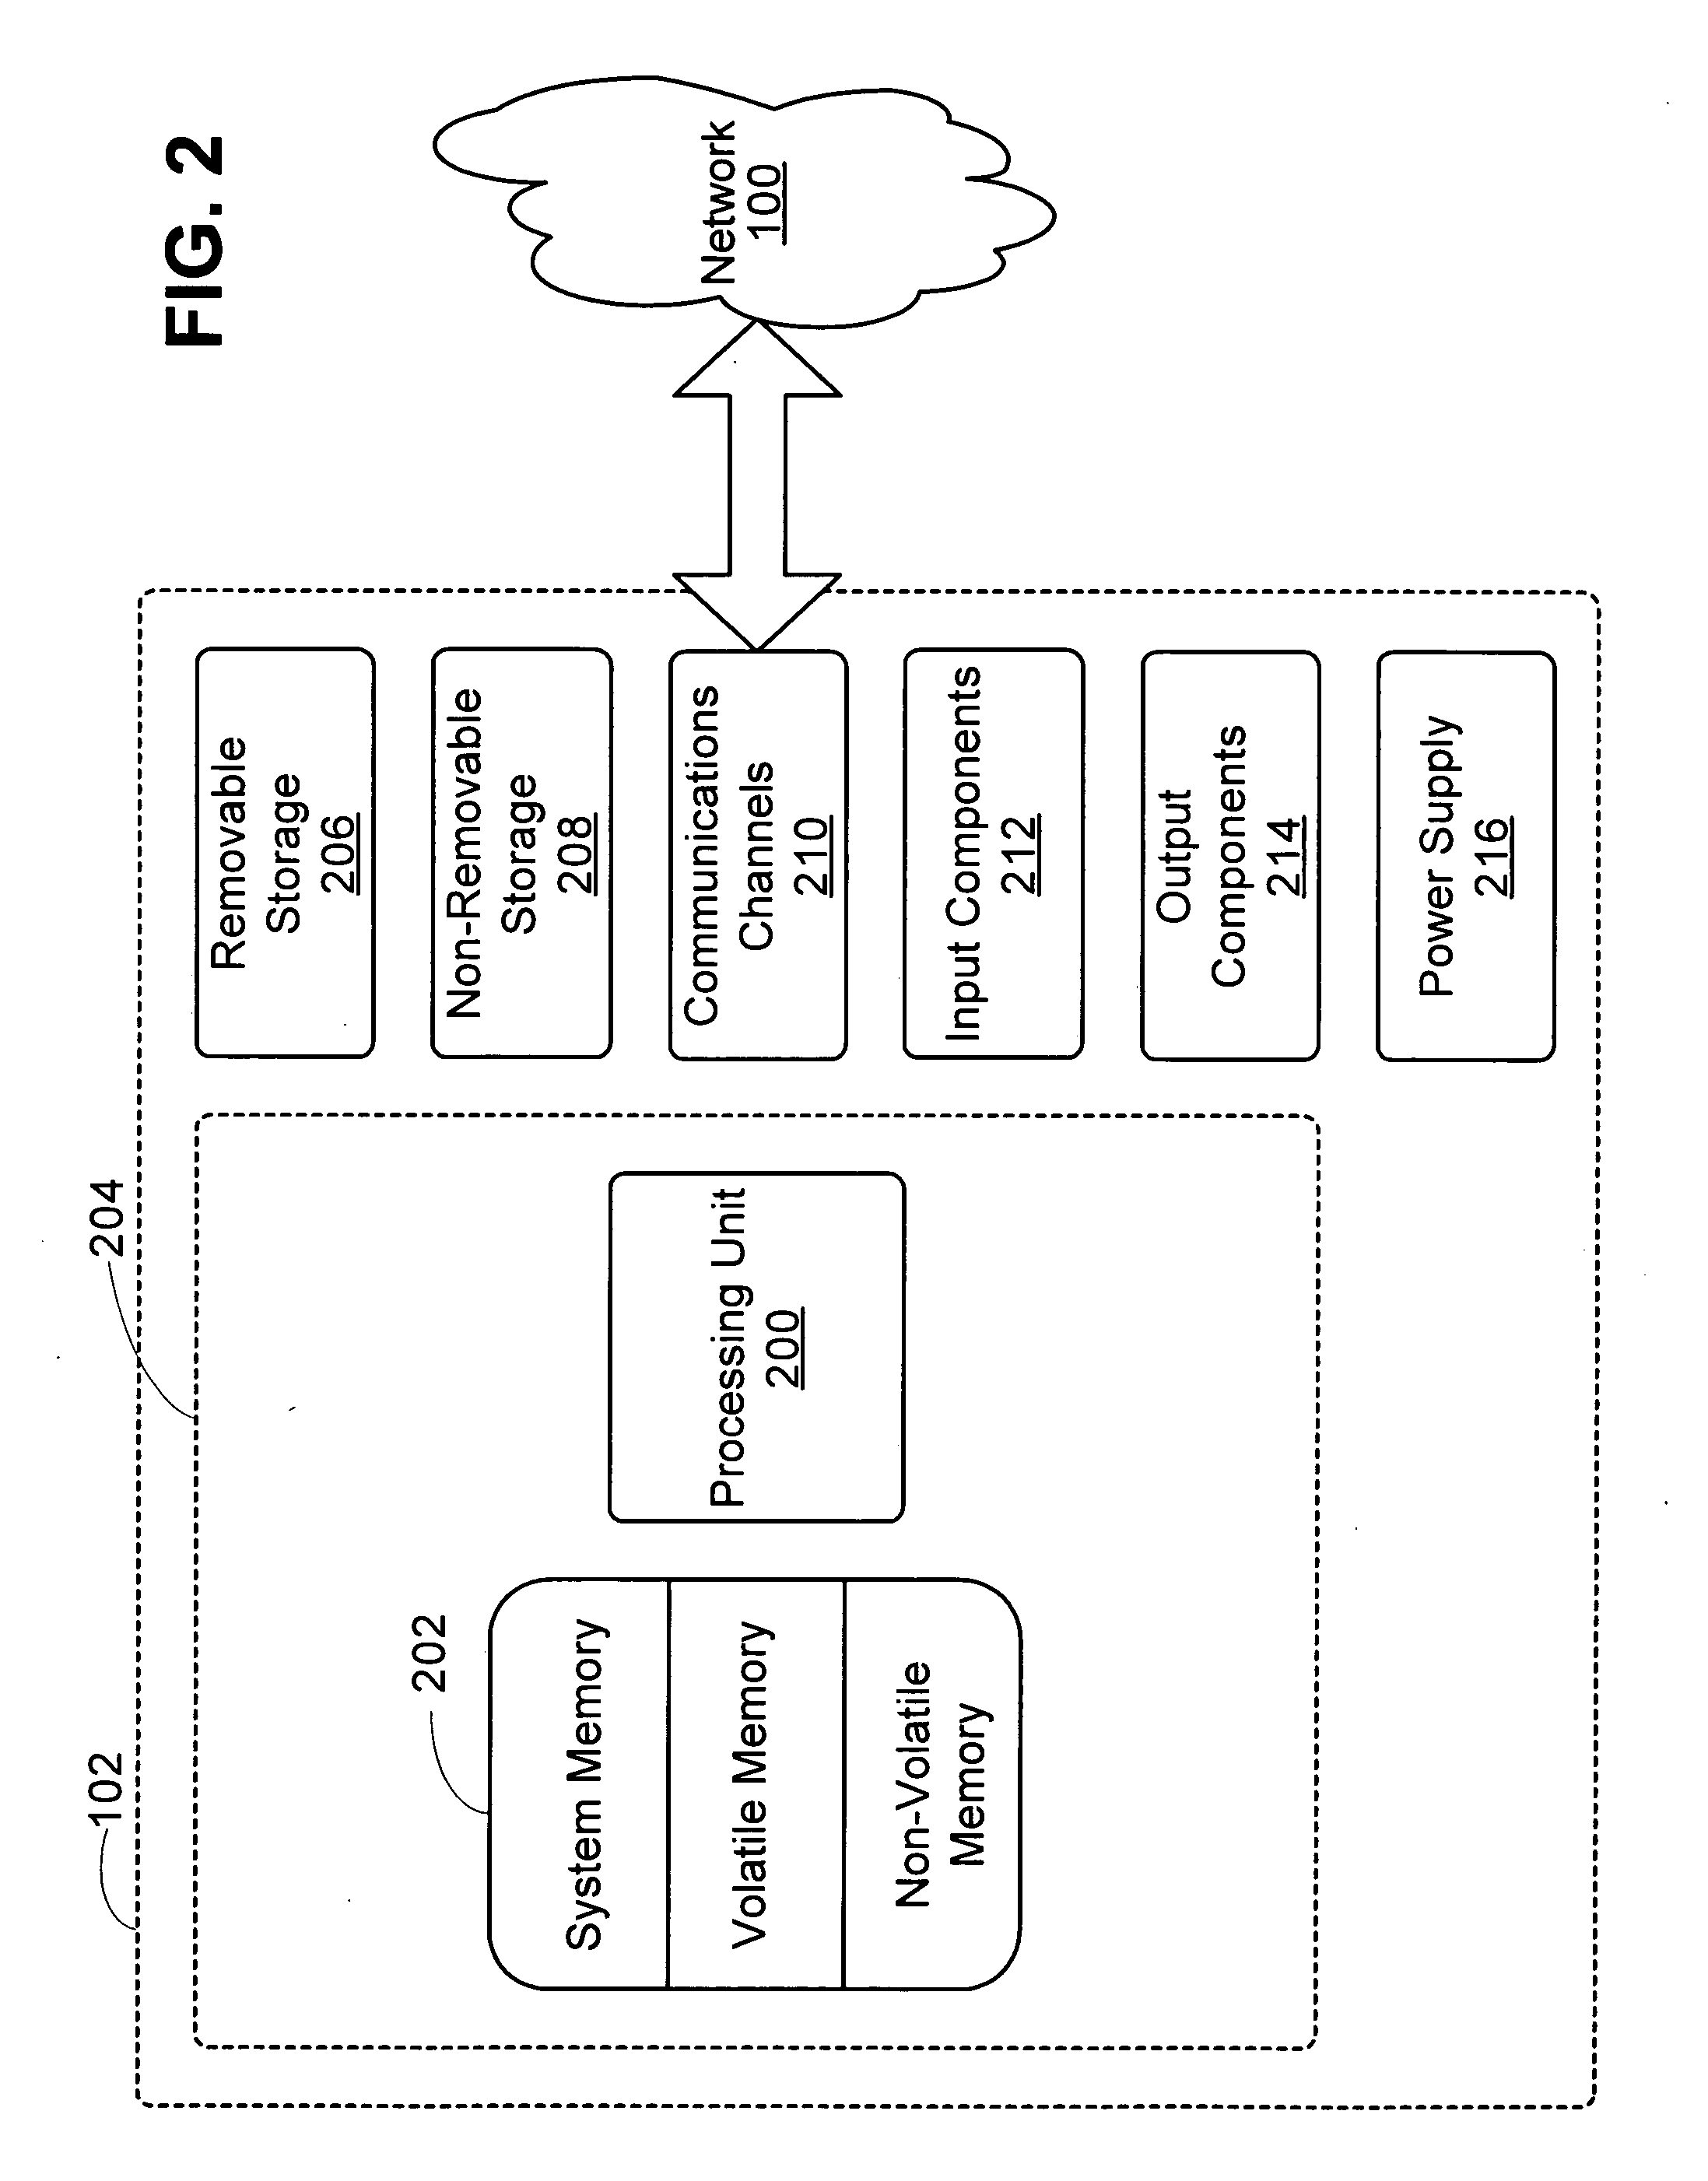 Method and system for managing identities in a peer-to-peer networking environment